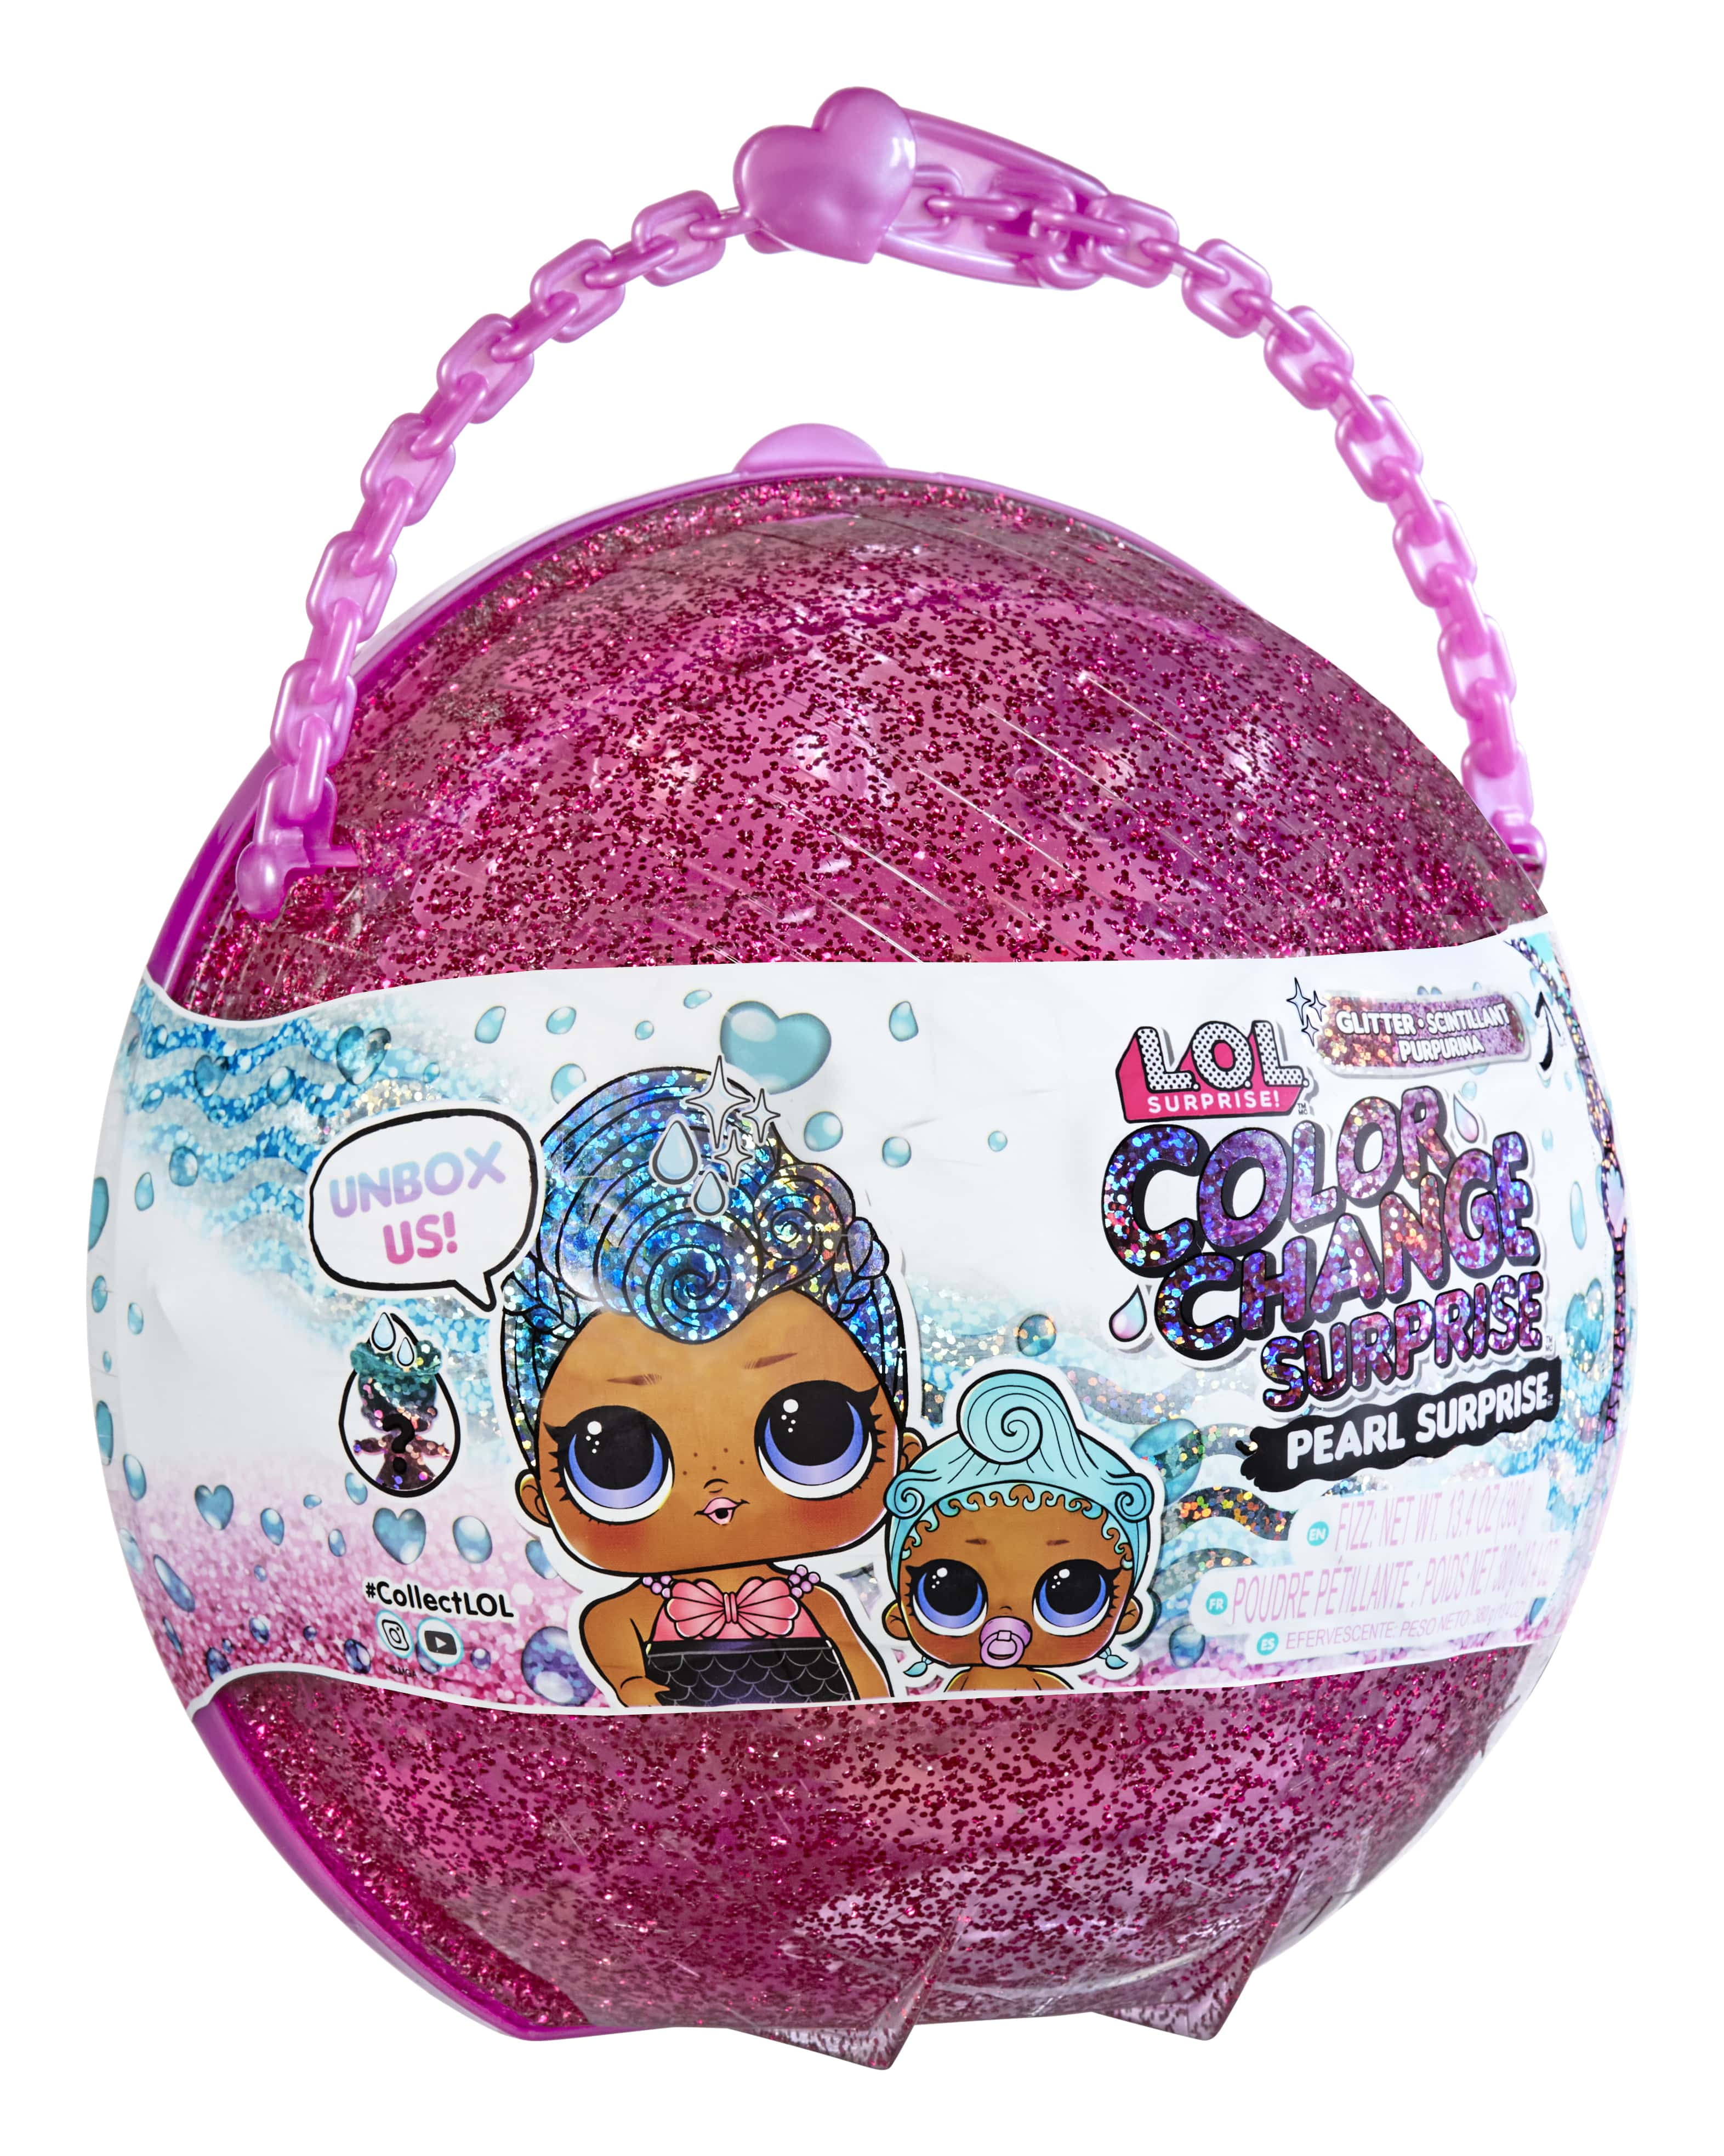 L.O.L Surprise! LOL Surprise Glitter Color Change ™ Pearl Surprise™ with 6 Surprises and an Exclusive Doll and Lil Sister, Interactive Playset - Great Gift for Kids Ages 4+